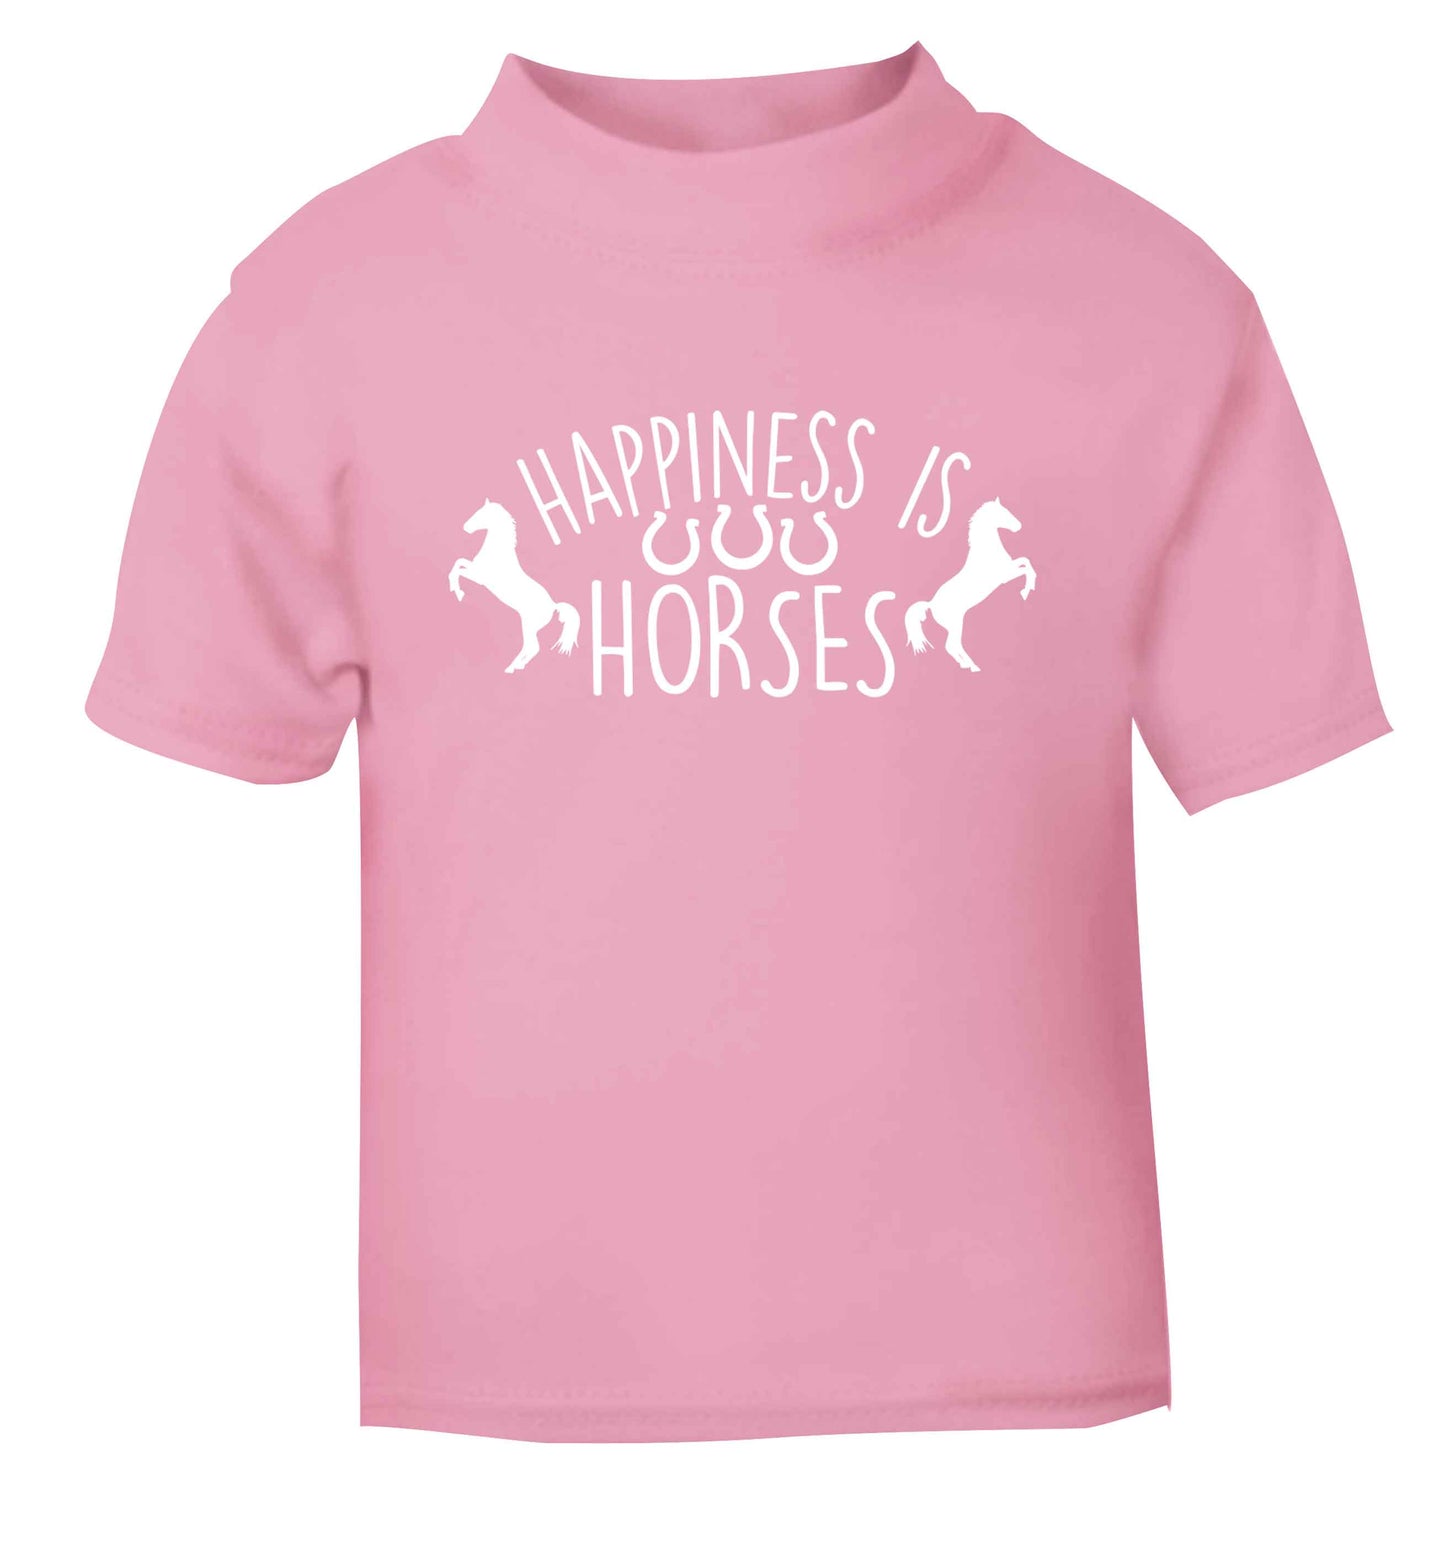 Happiness is horses light pink baby toddler Tshirt 2 Years